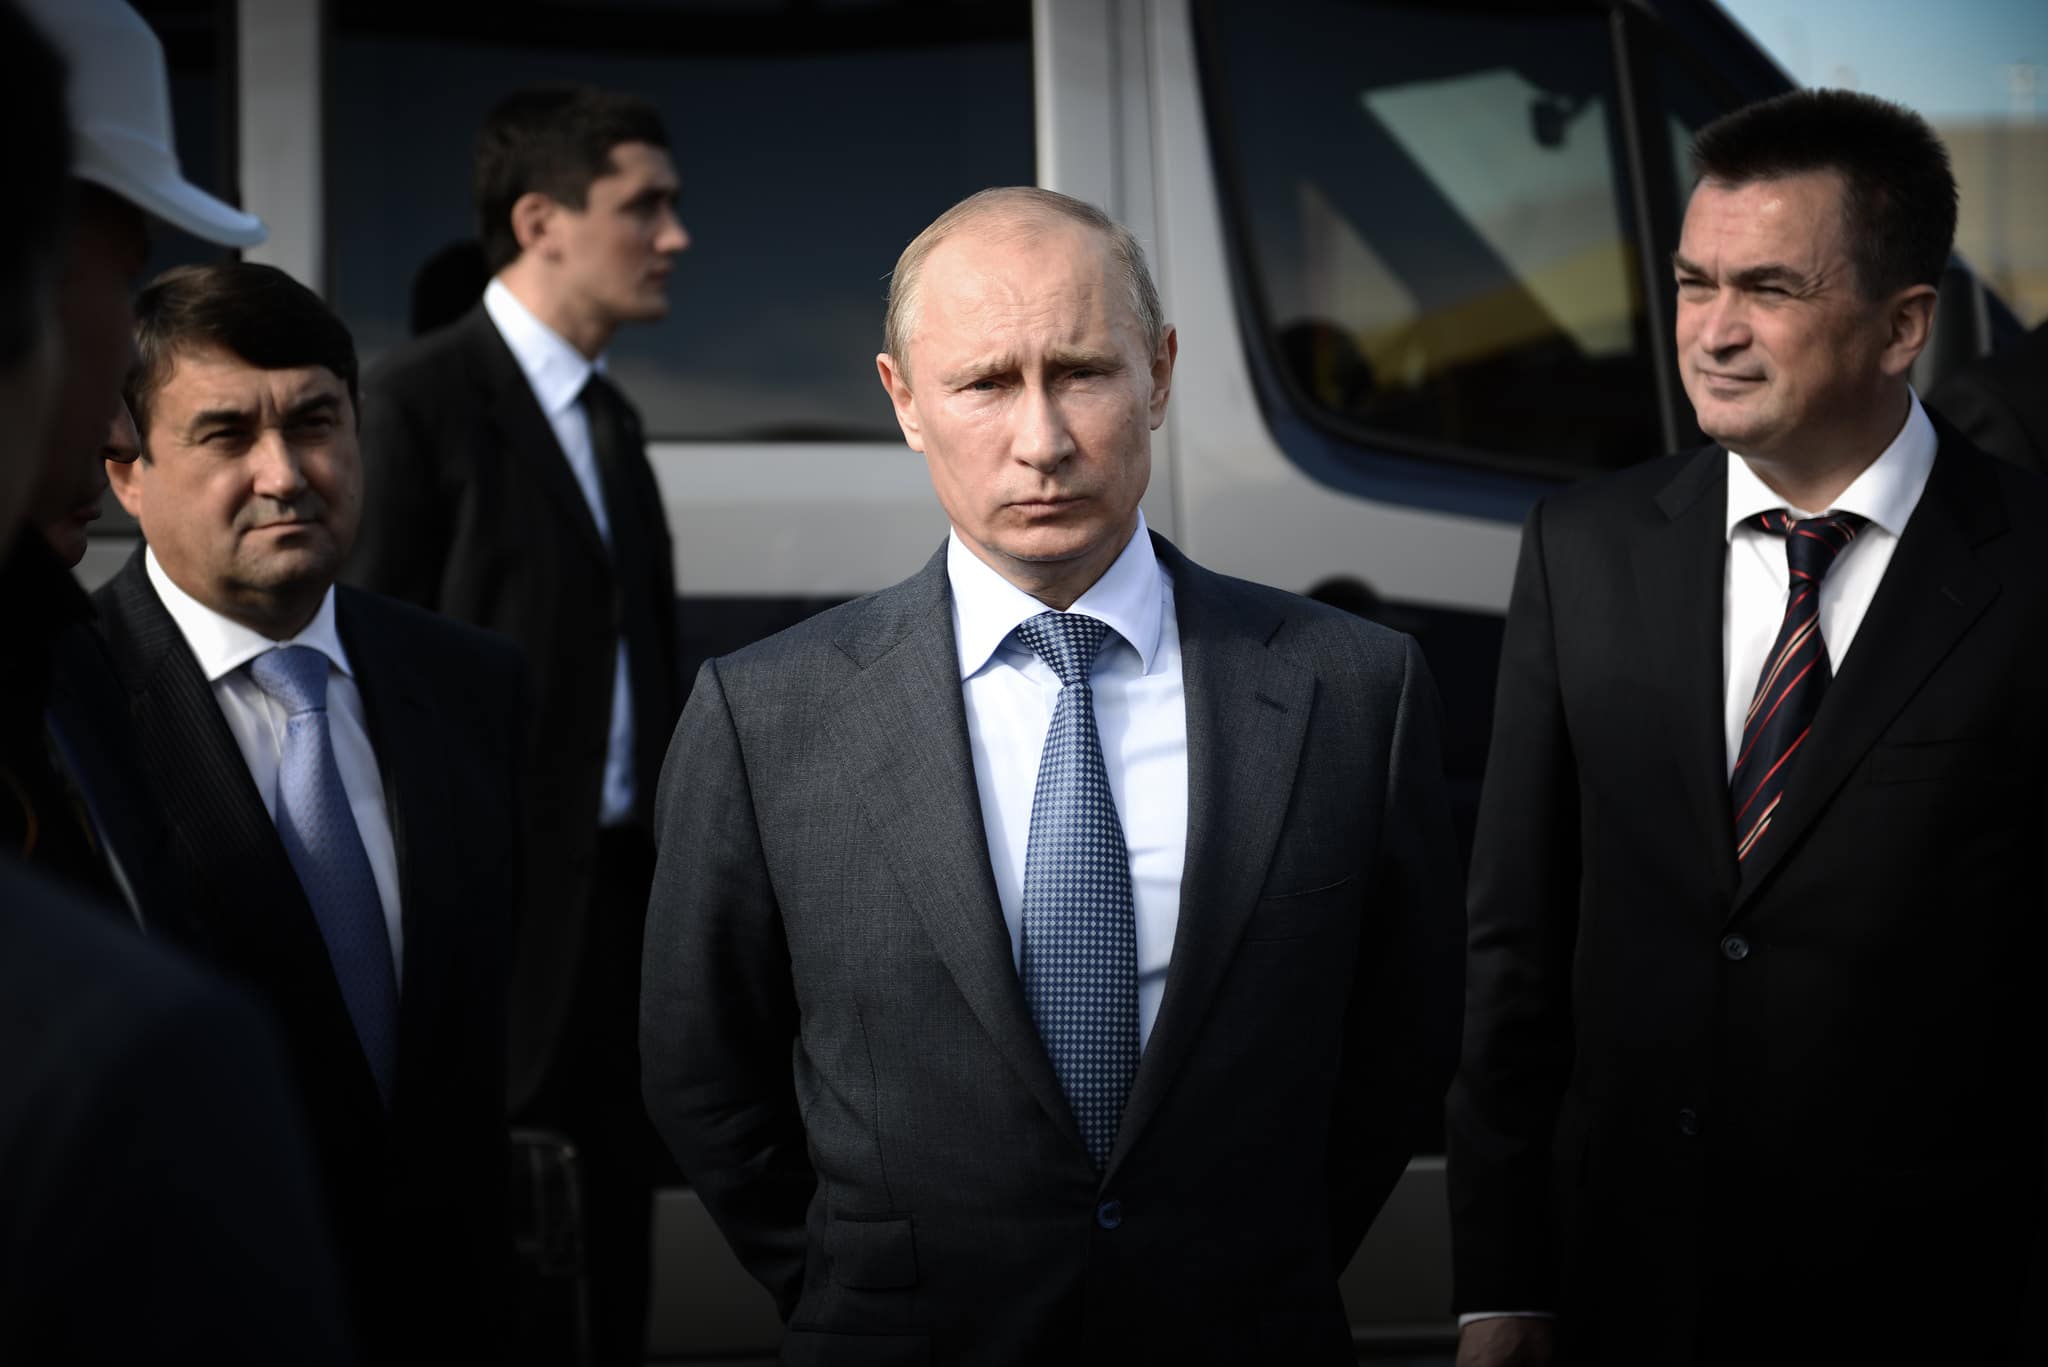 Putin with his bodyguards